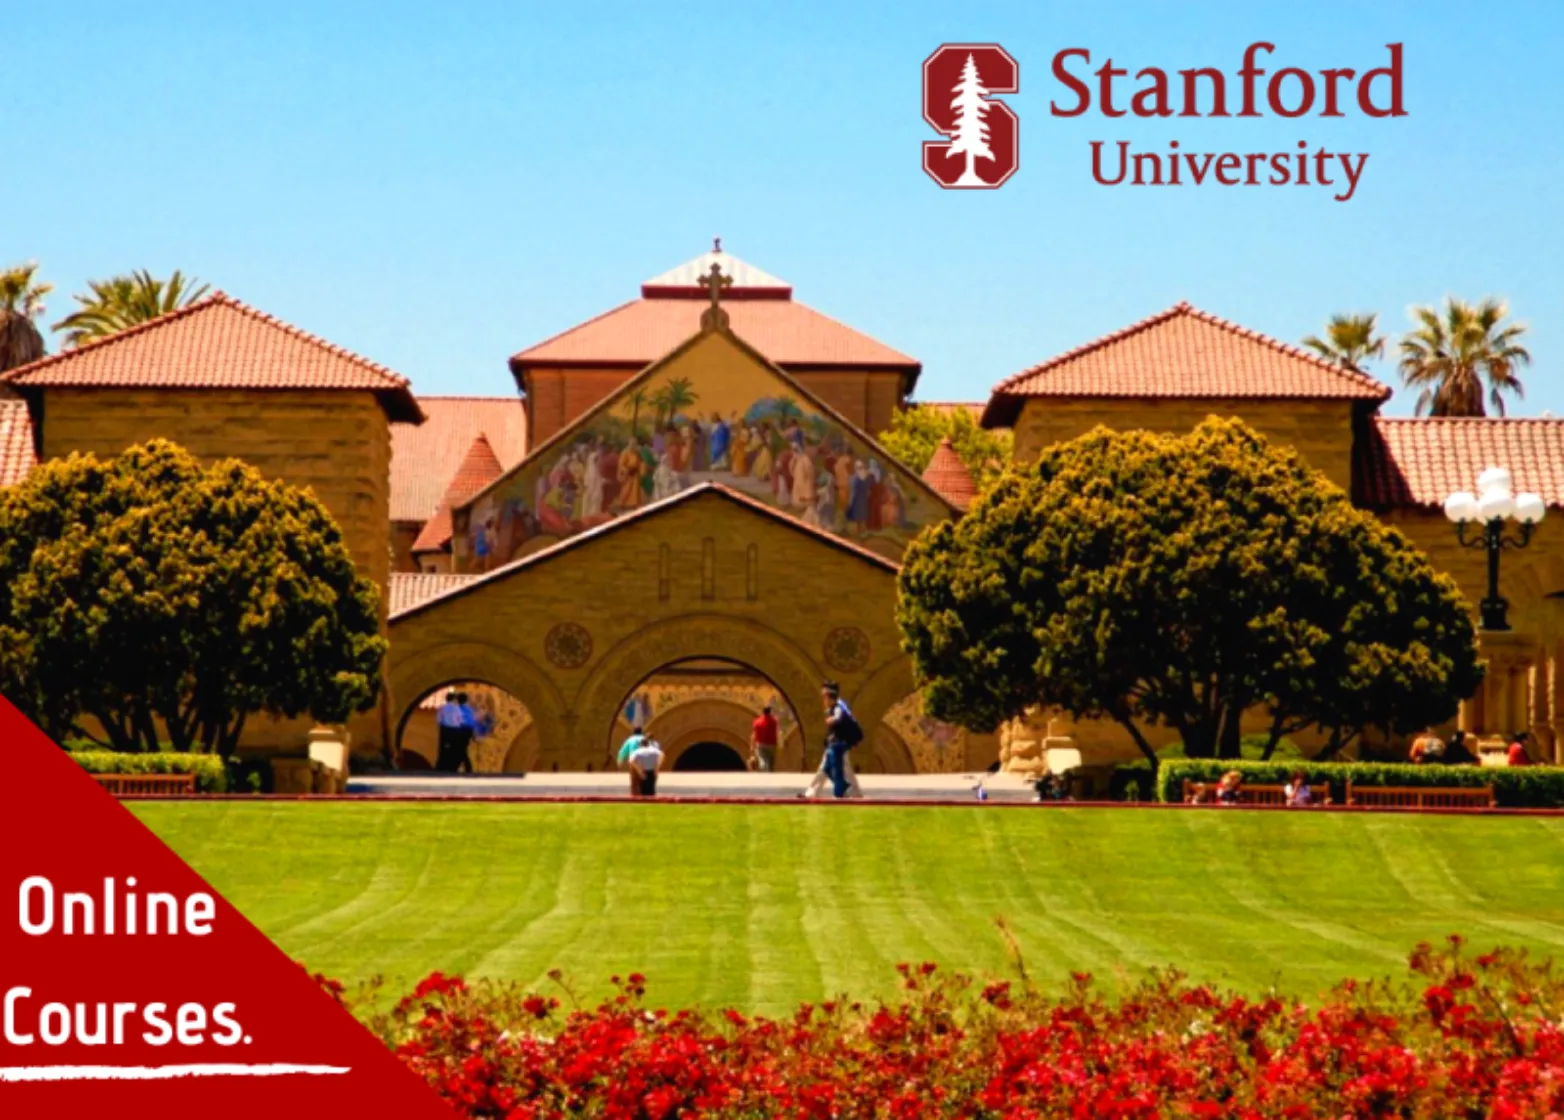 EXPLORE 15 FREE ONLINE COURSES WITH CERTIFICATION FROM STANFORD UNIVERSITY, USA